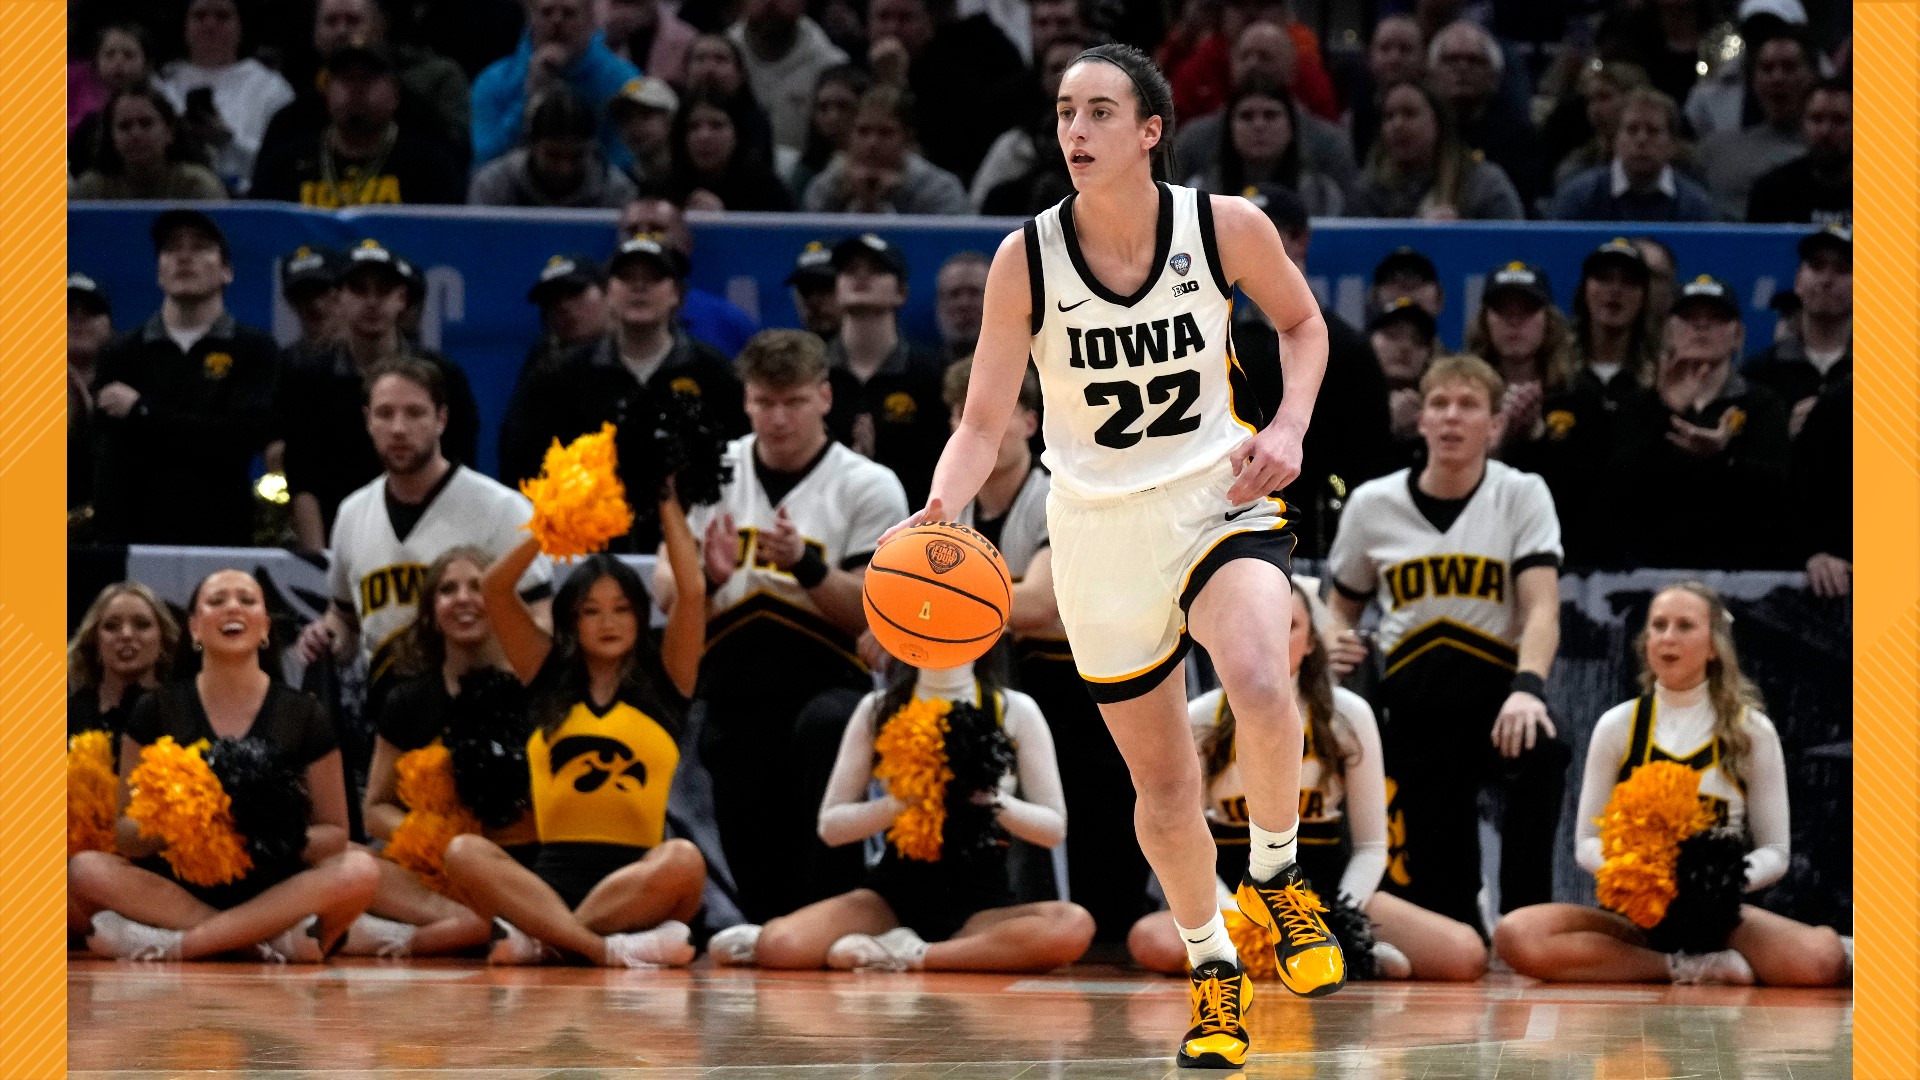 Iowa is headed back to the national championship game, where they'll face an unbeaten South Carolina.